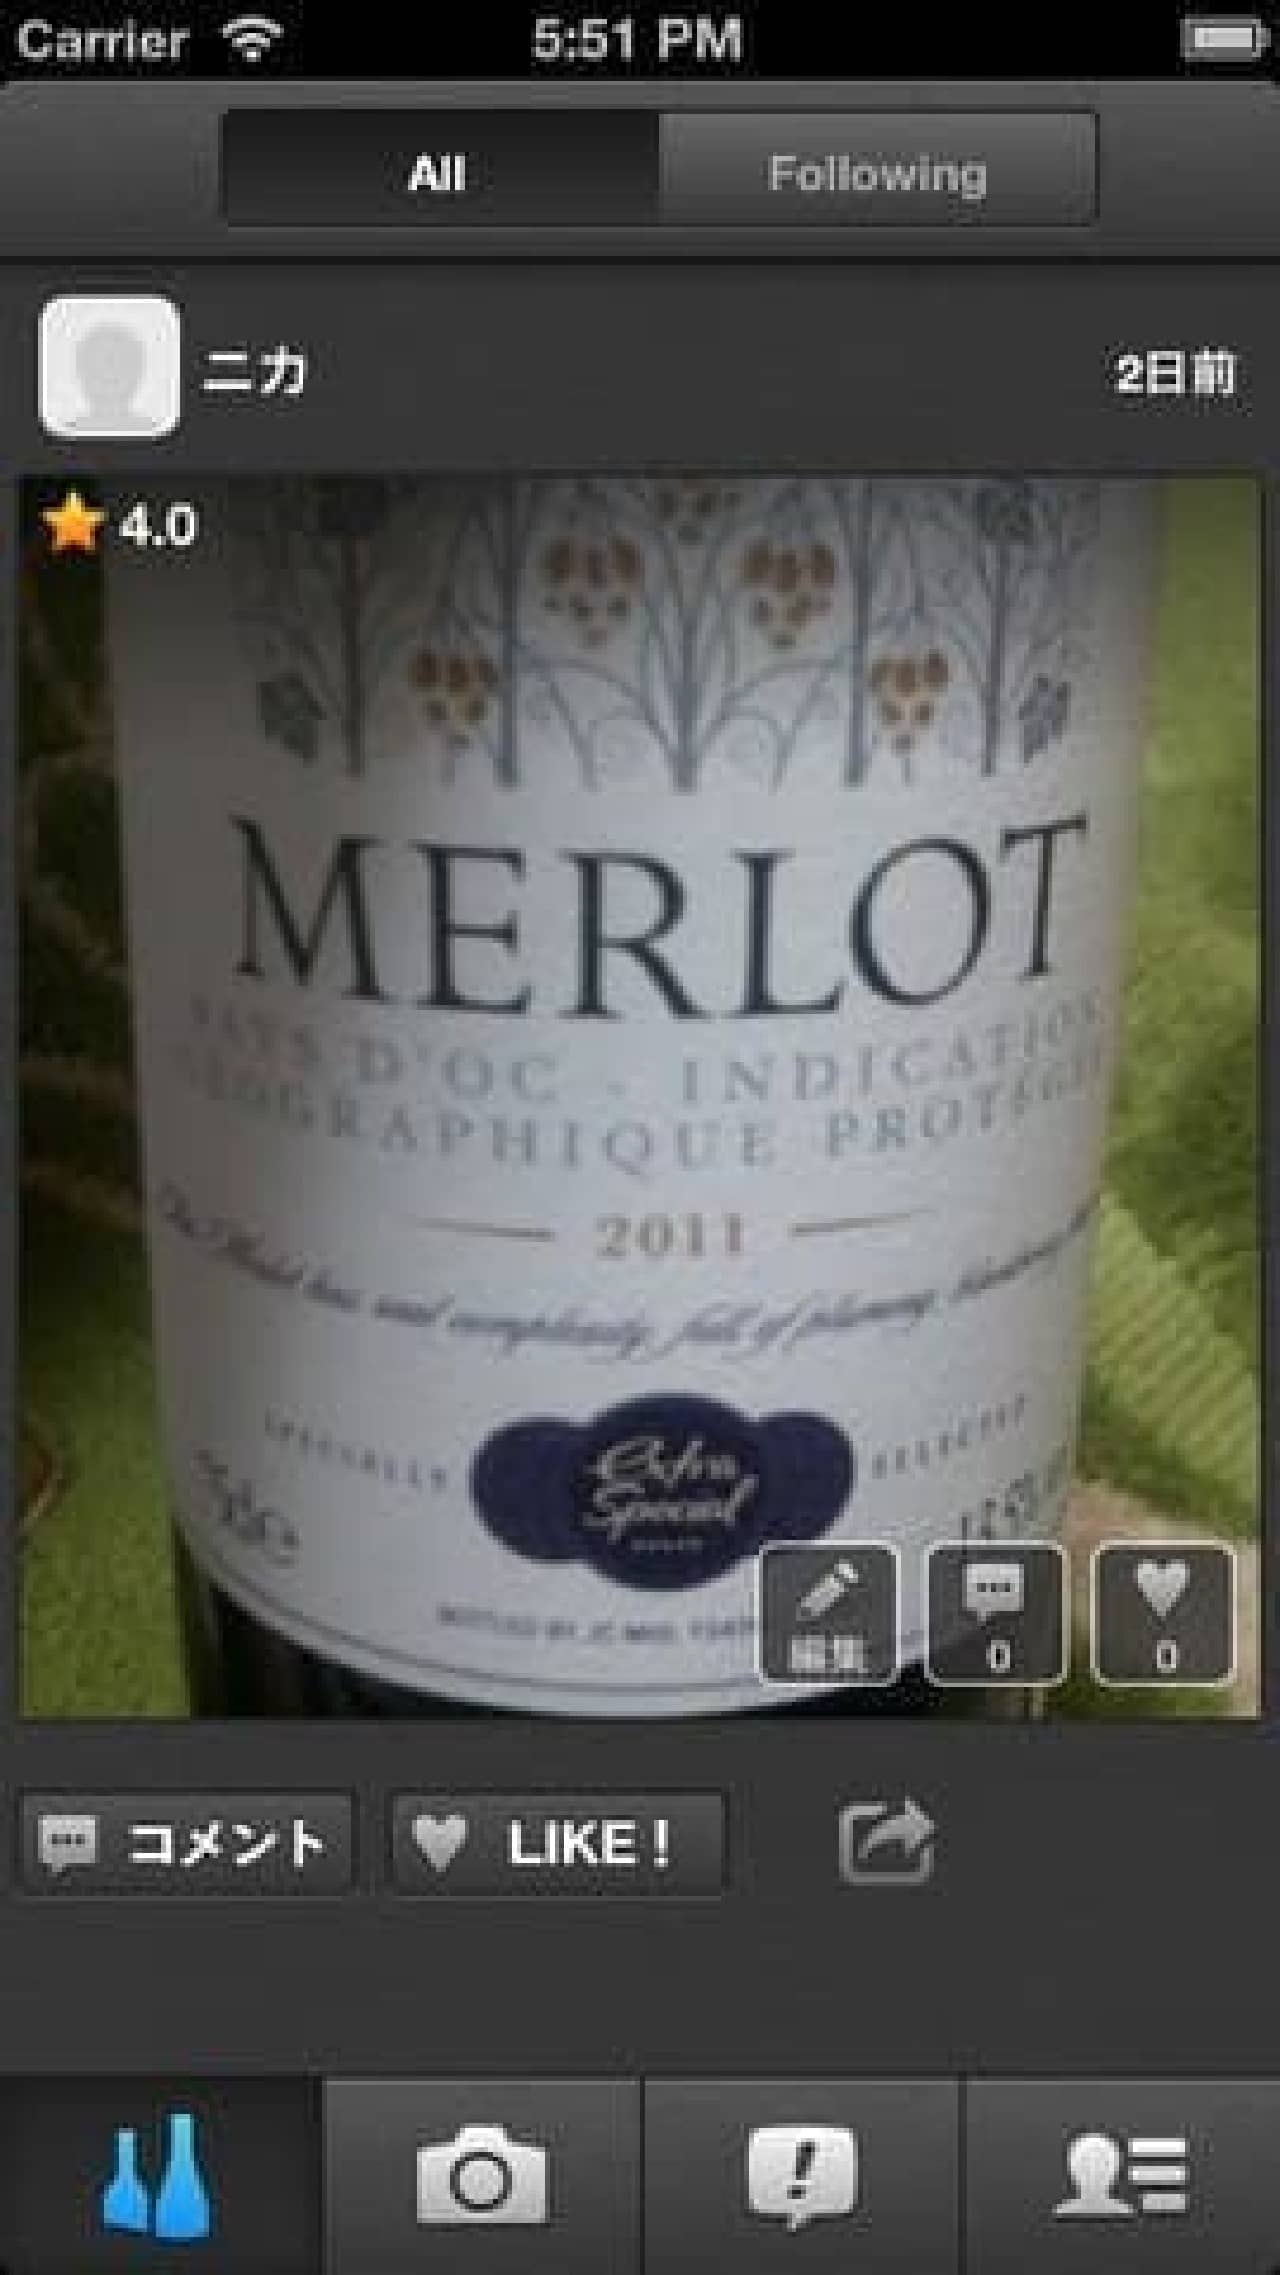 Make a wine companion by pressing the "LIKE" button on your favorite wine